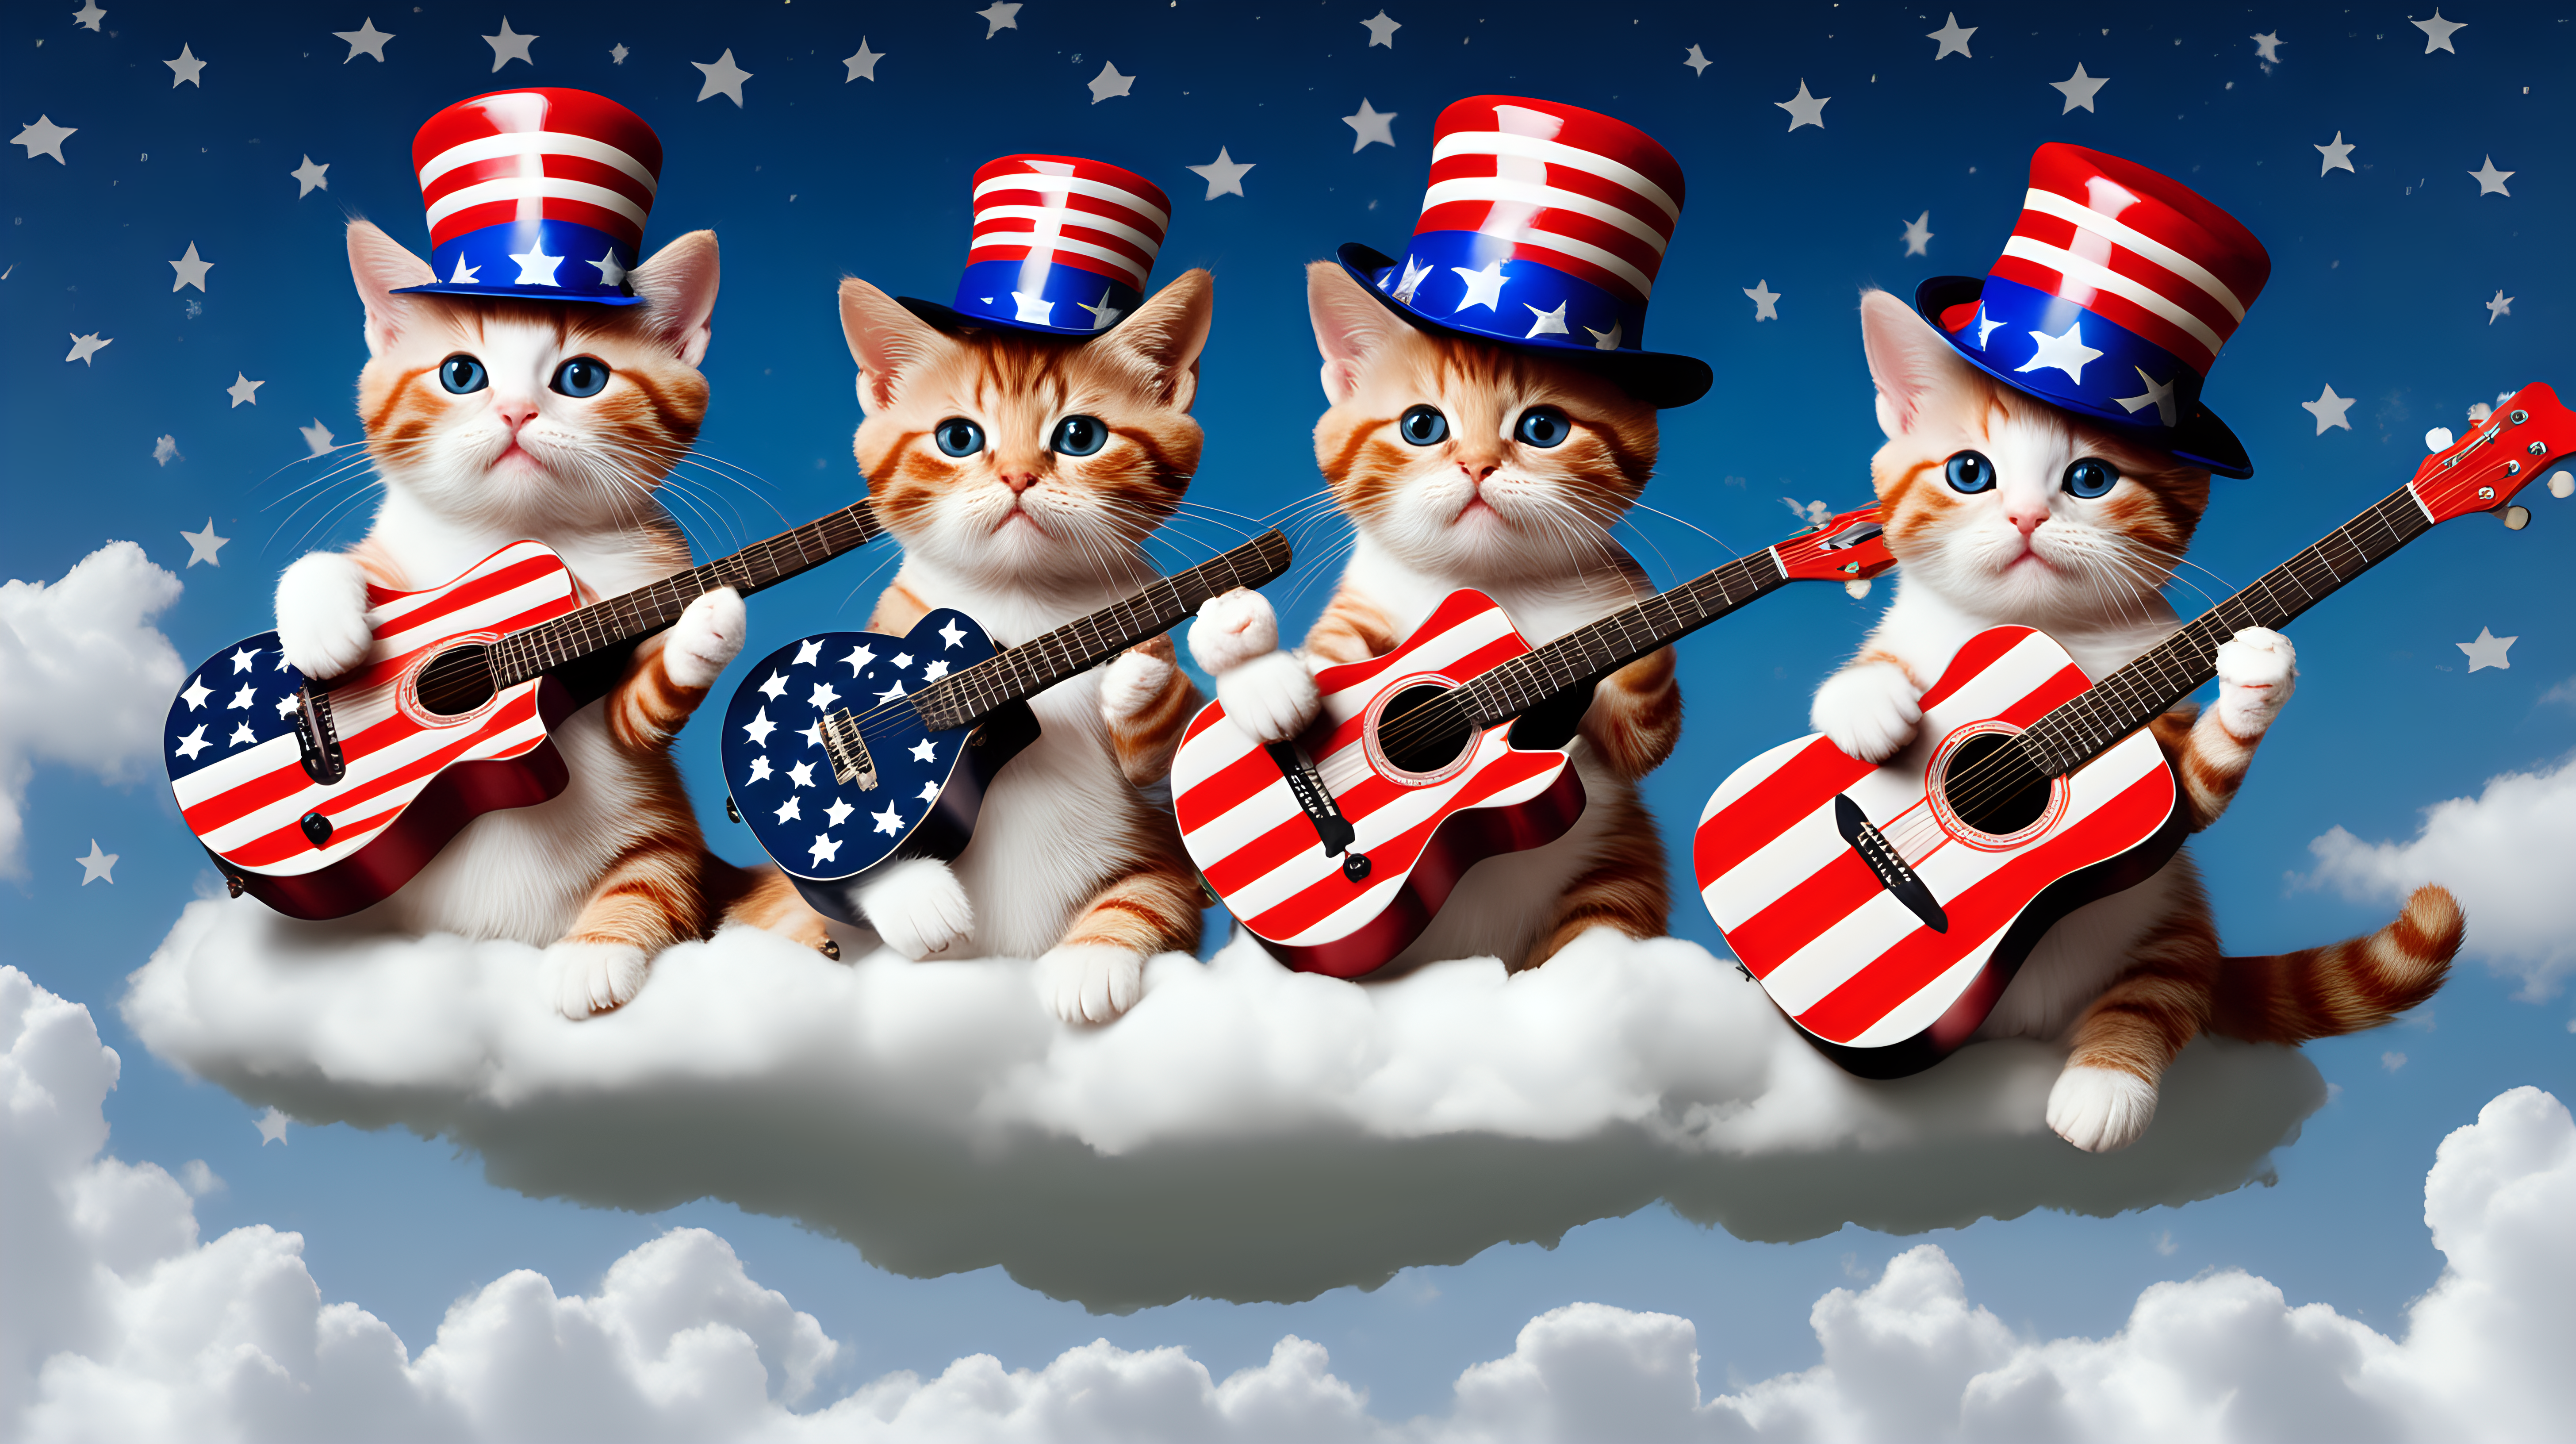 3 cats in hats playing stars and stripes